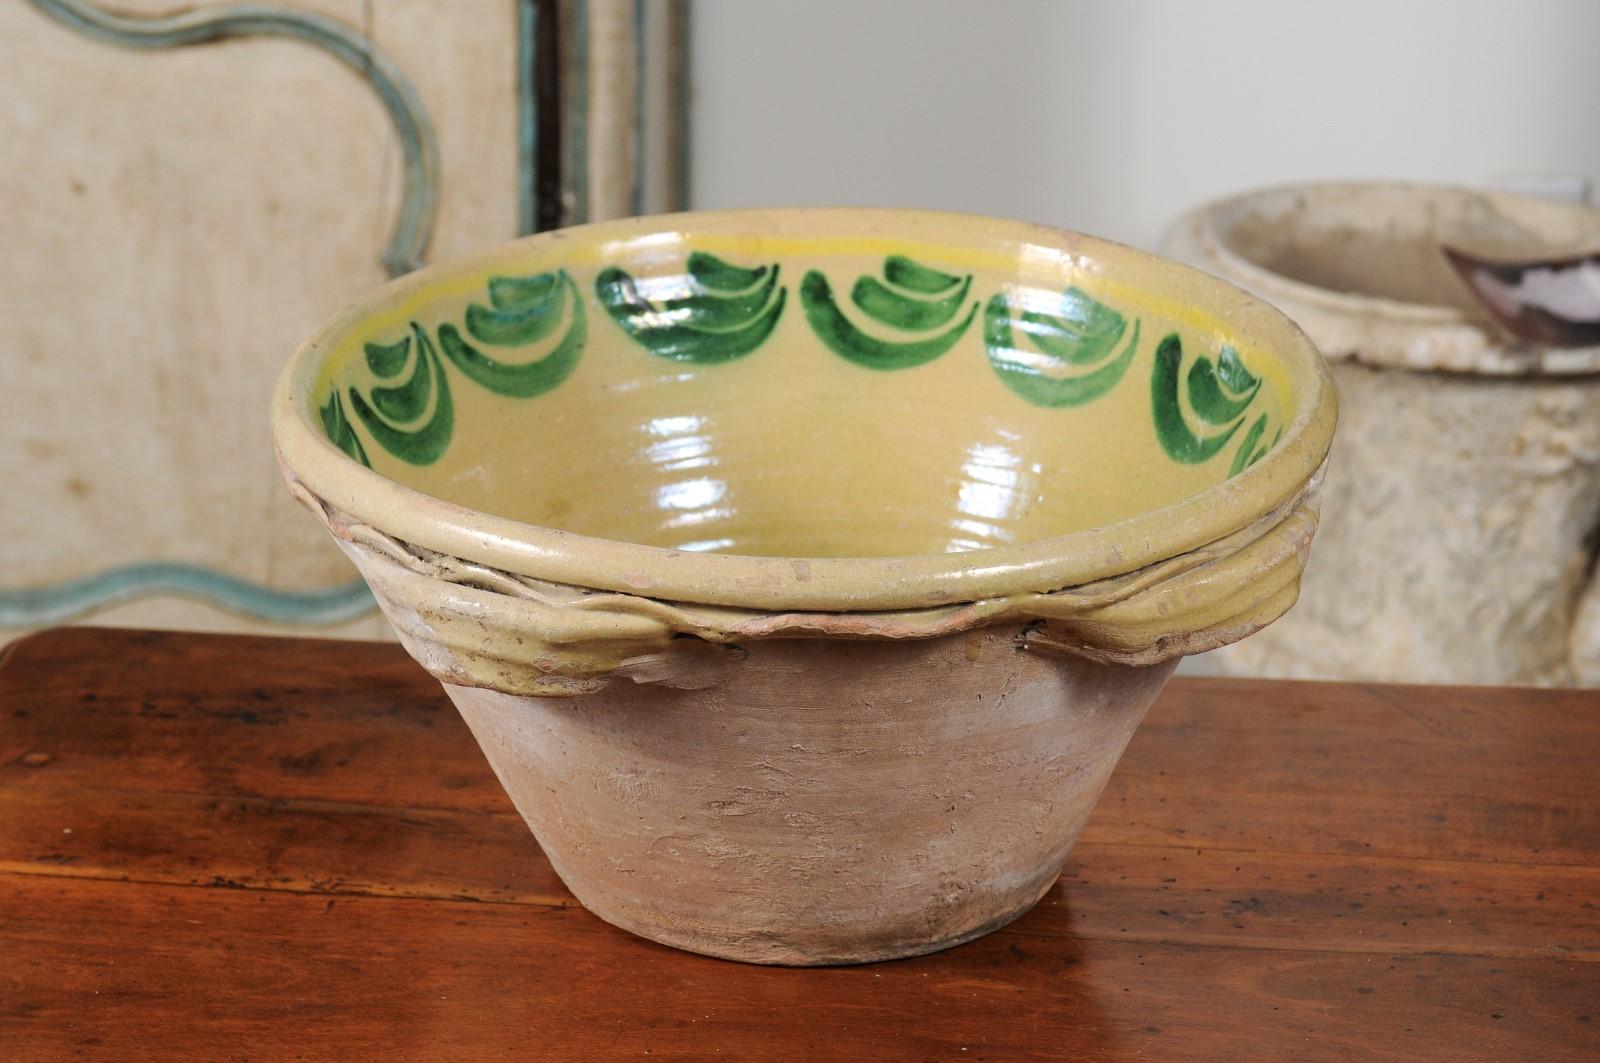 Italian 1820s Yellow Glazed Pottery Bowl from Calabria with Green Accents 3